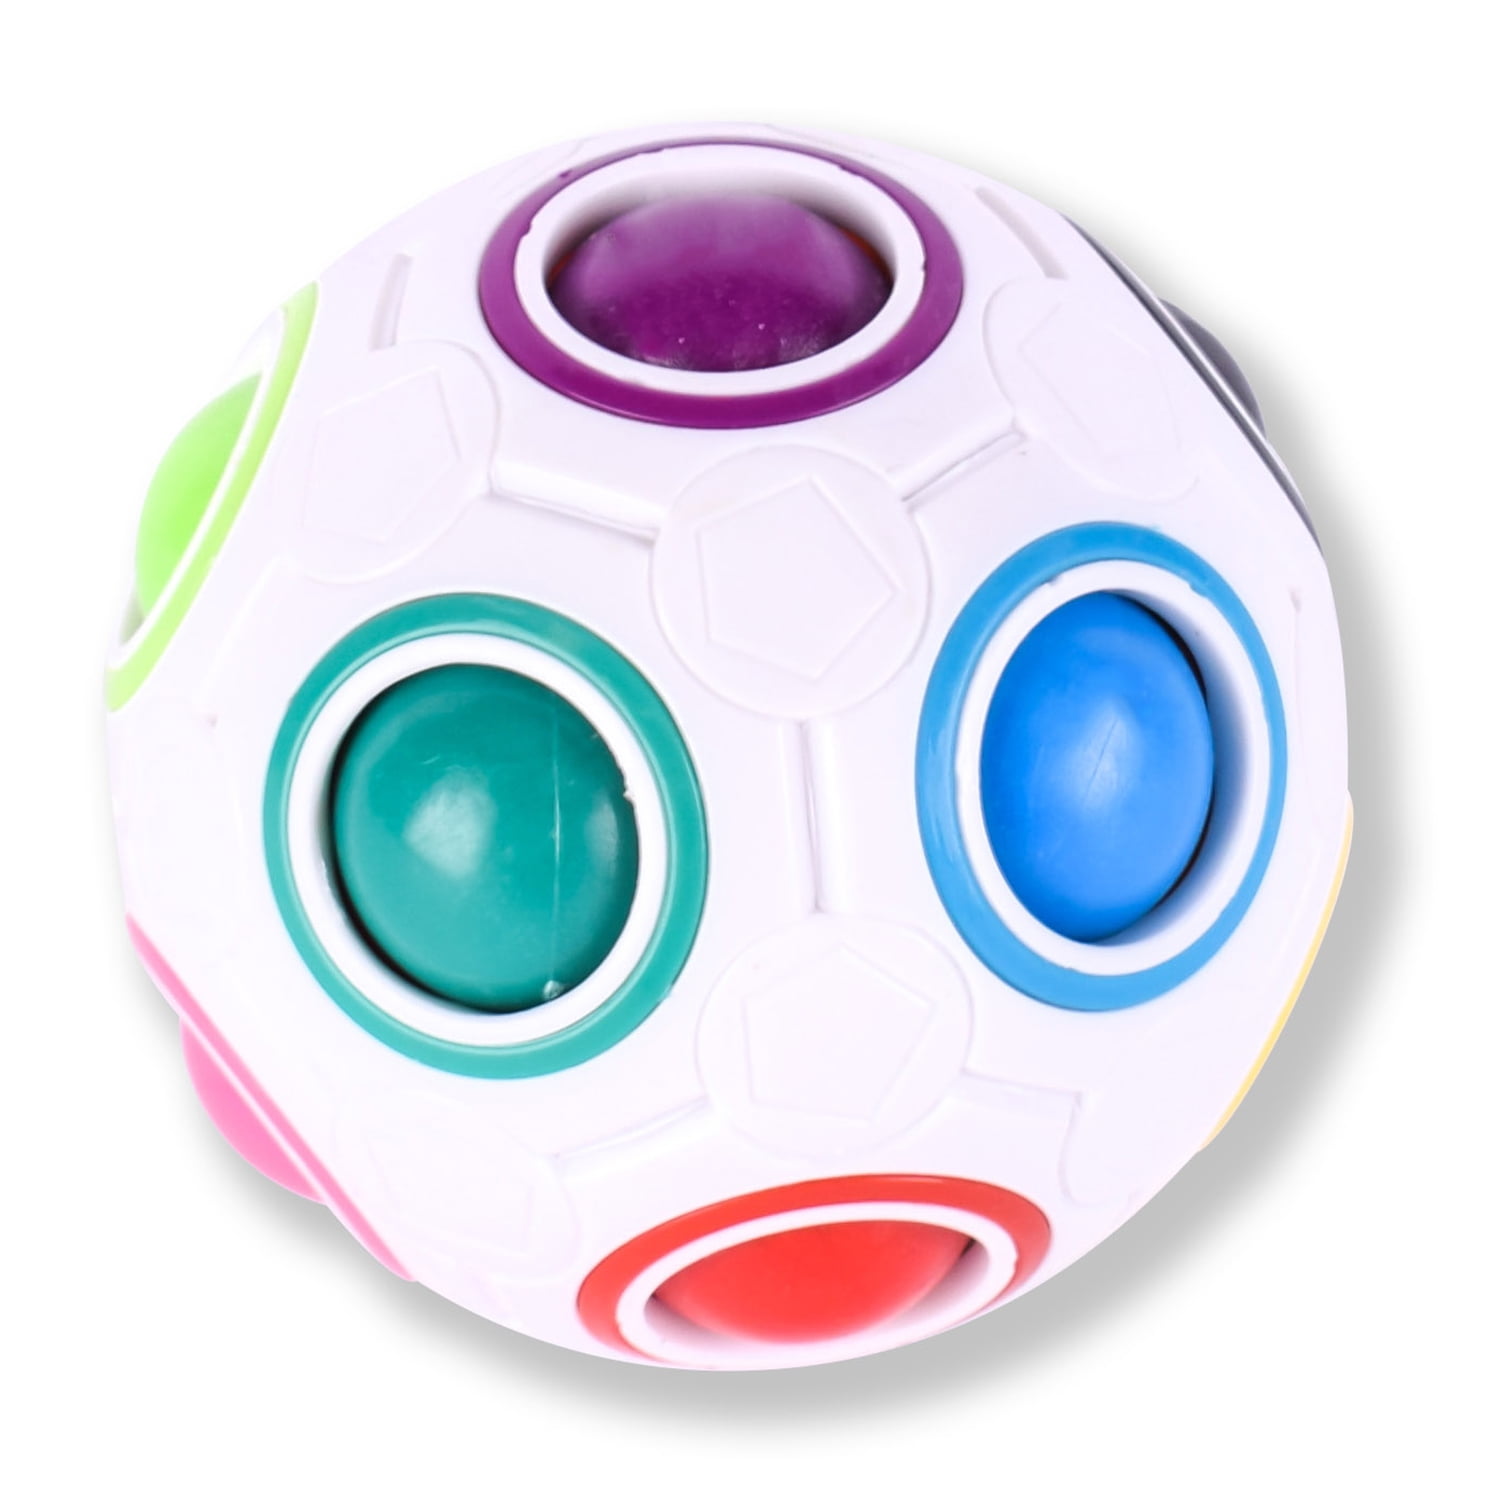 Giggle Zone Rainbow Color Match, Puzzle Ball Novelty Toy